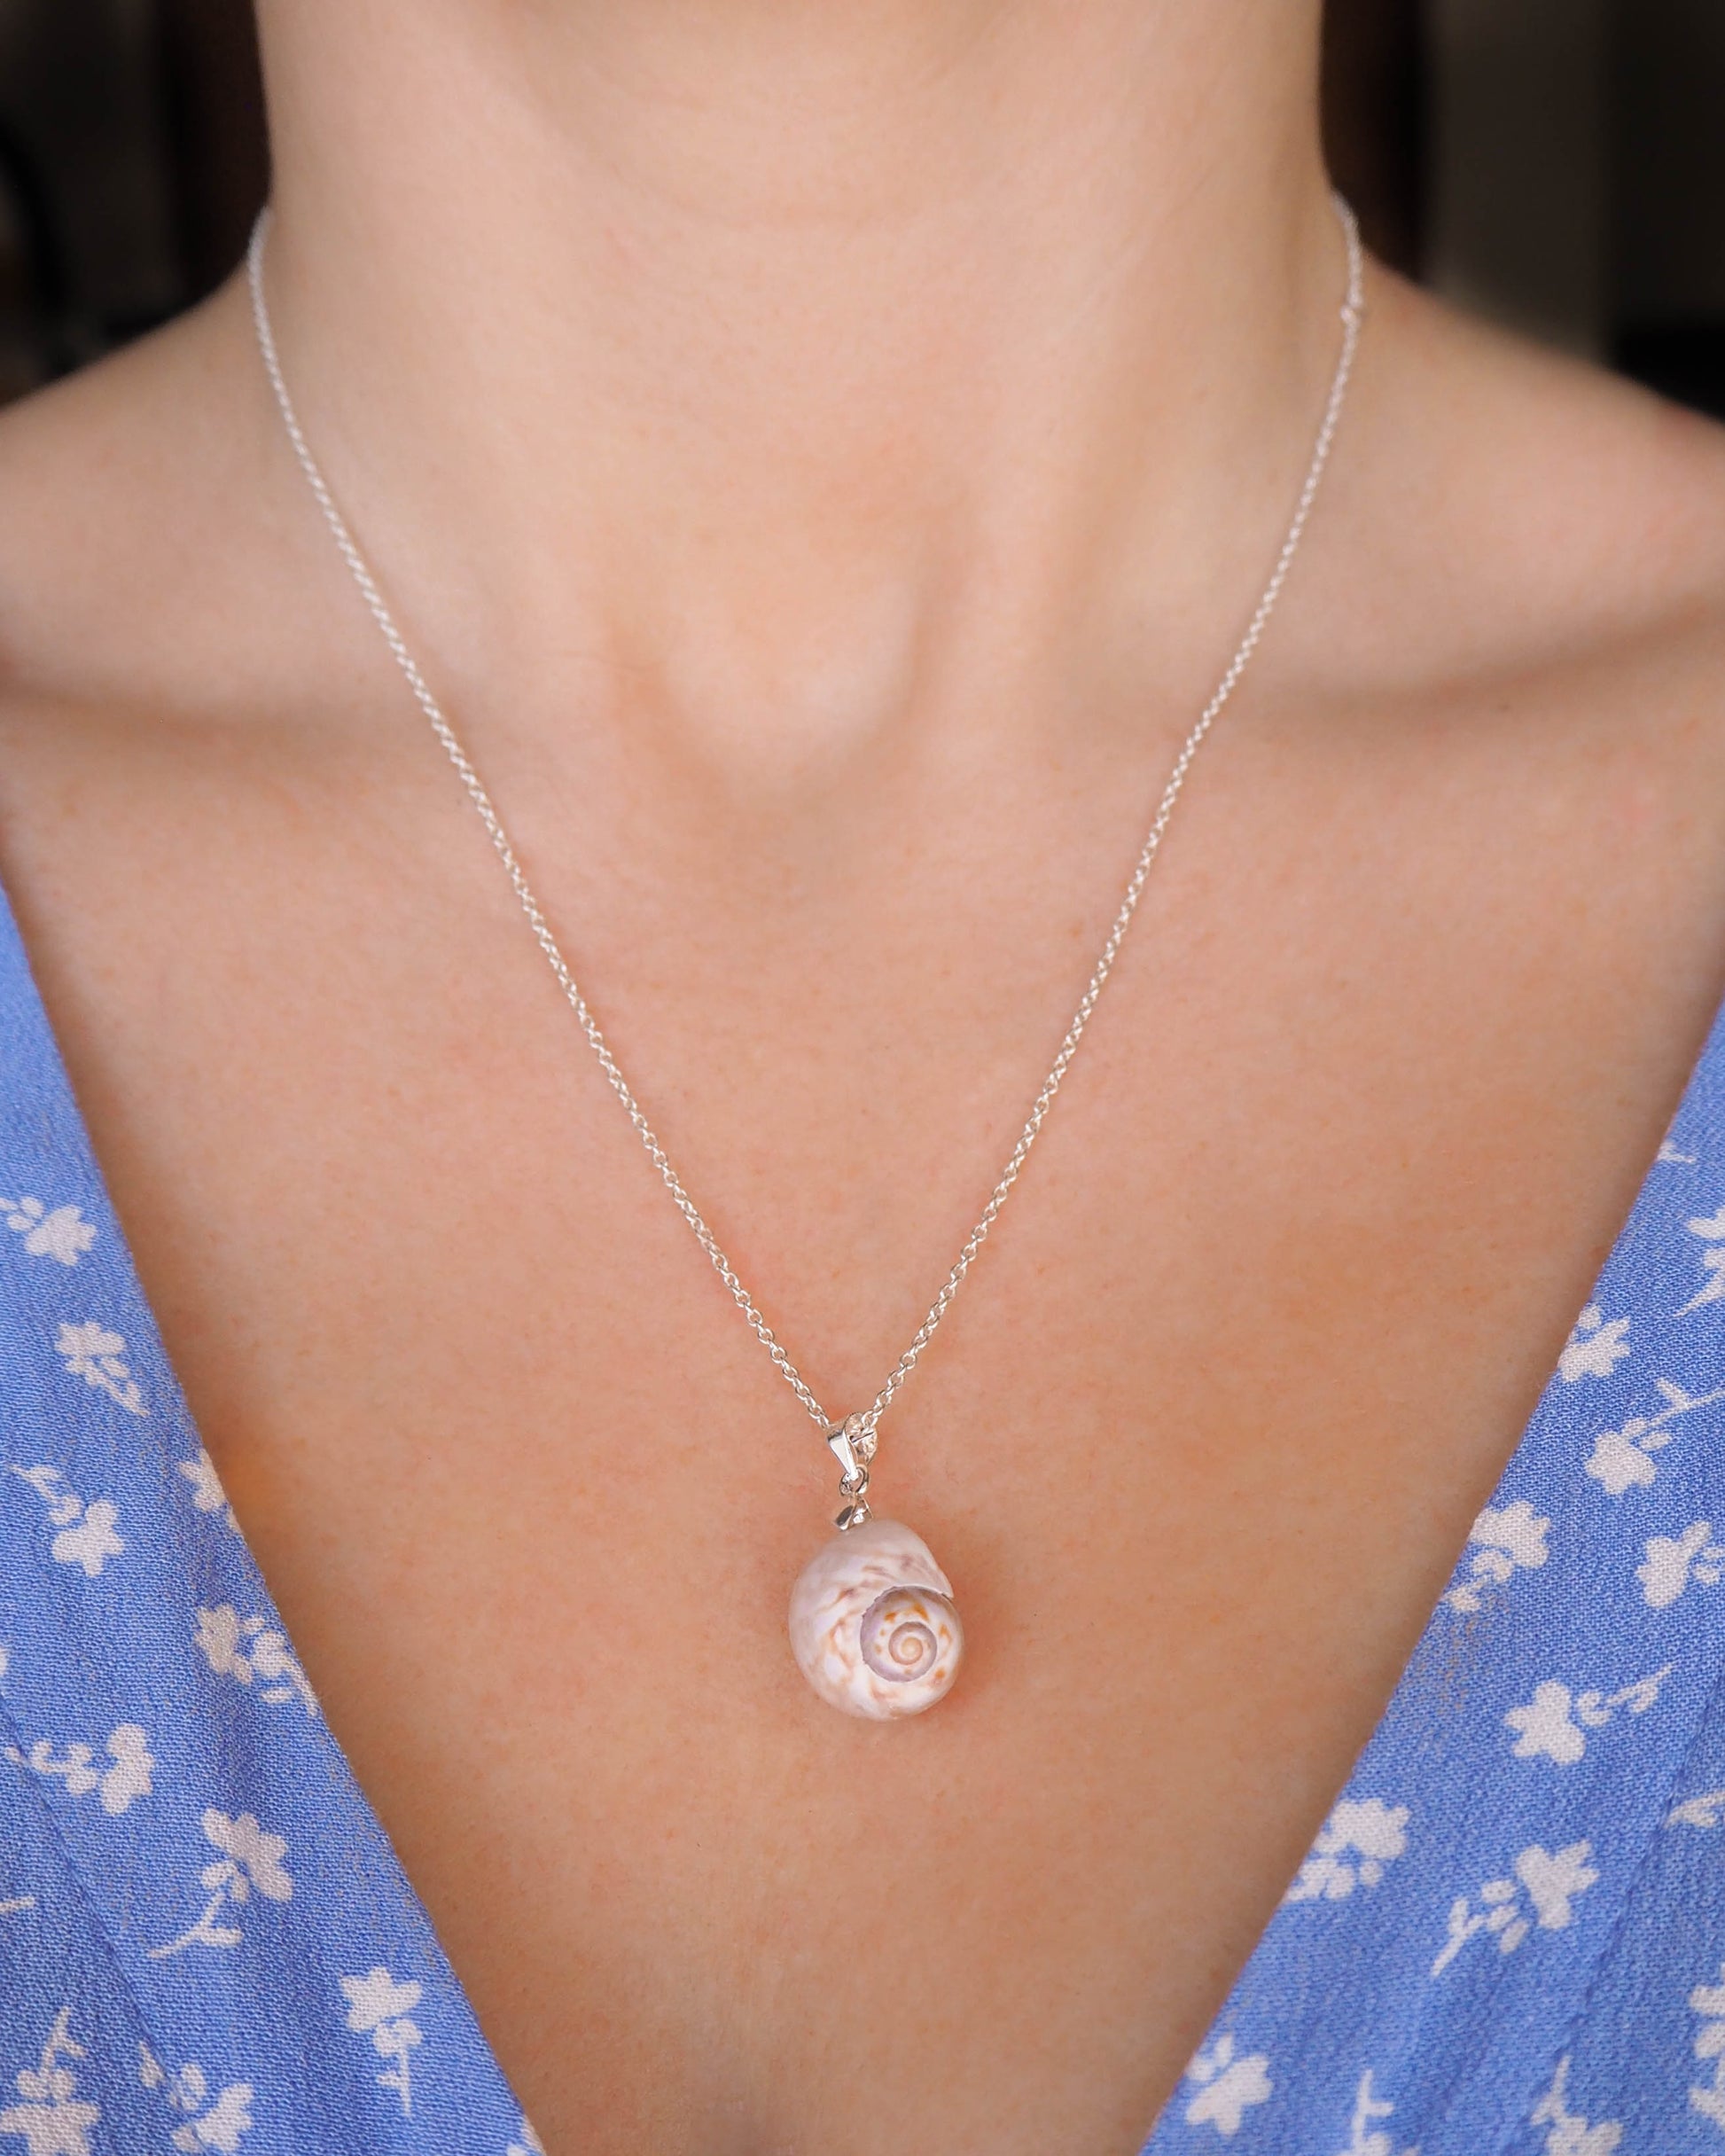 A model gracefully wearing the Moon Shell Silver Pendant, showcasing its coastal charm and elegance, Coastal Jewelry, Portuguese Inspiration, Nature-Inspired Pendant